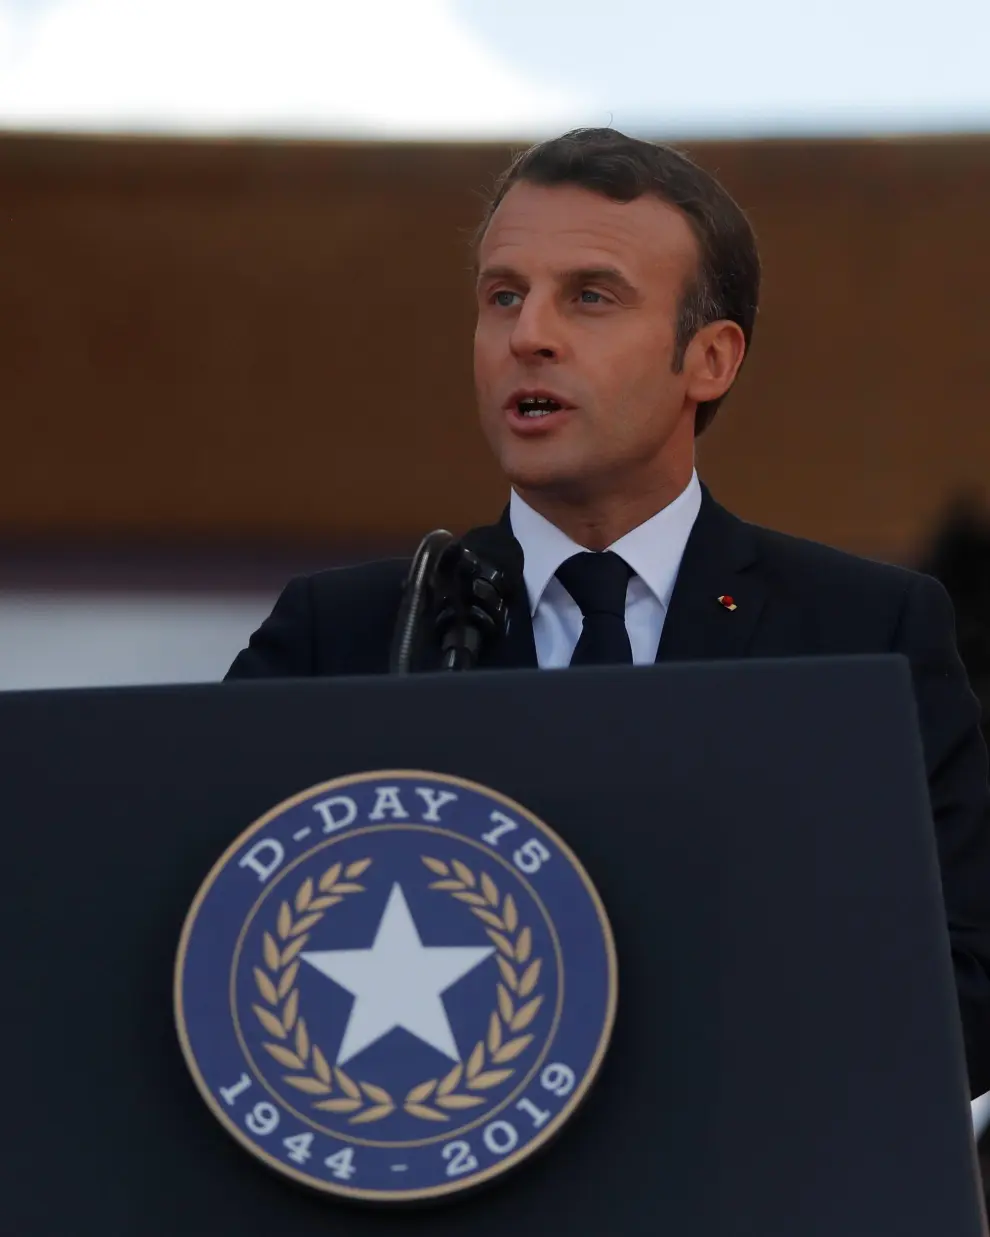 French President Emmanuel Macron delivers a speech during the commemoration ceremony for the 75th anniversary of D-Day at the American cemetery of Colleville-sur-Mer in Normandy, France, June 6, 2019. REUTERS/Carlos Barria [[[REUTERS VOCENTO]]] DDAY-ANNIVERSARY/USA-TRUMP-MACRON